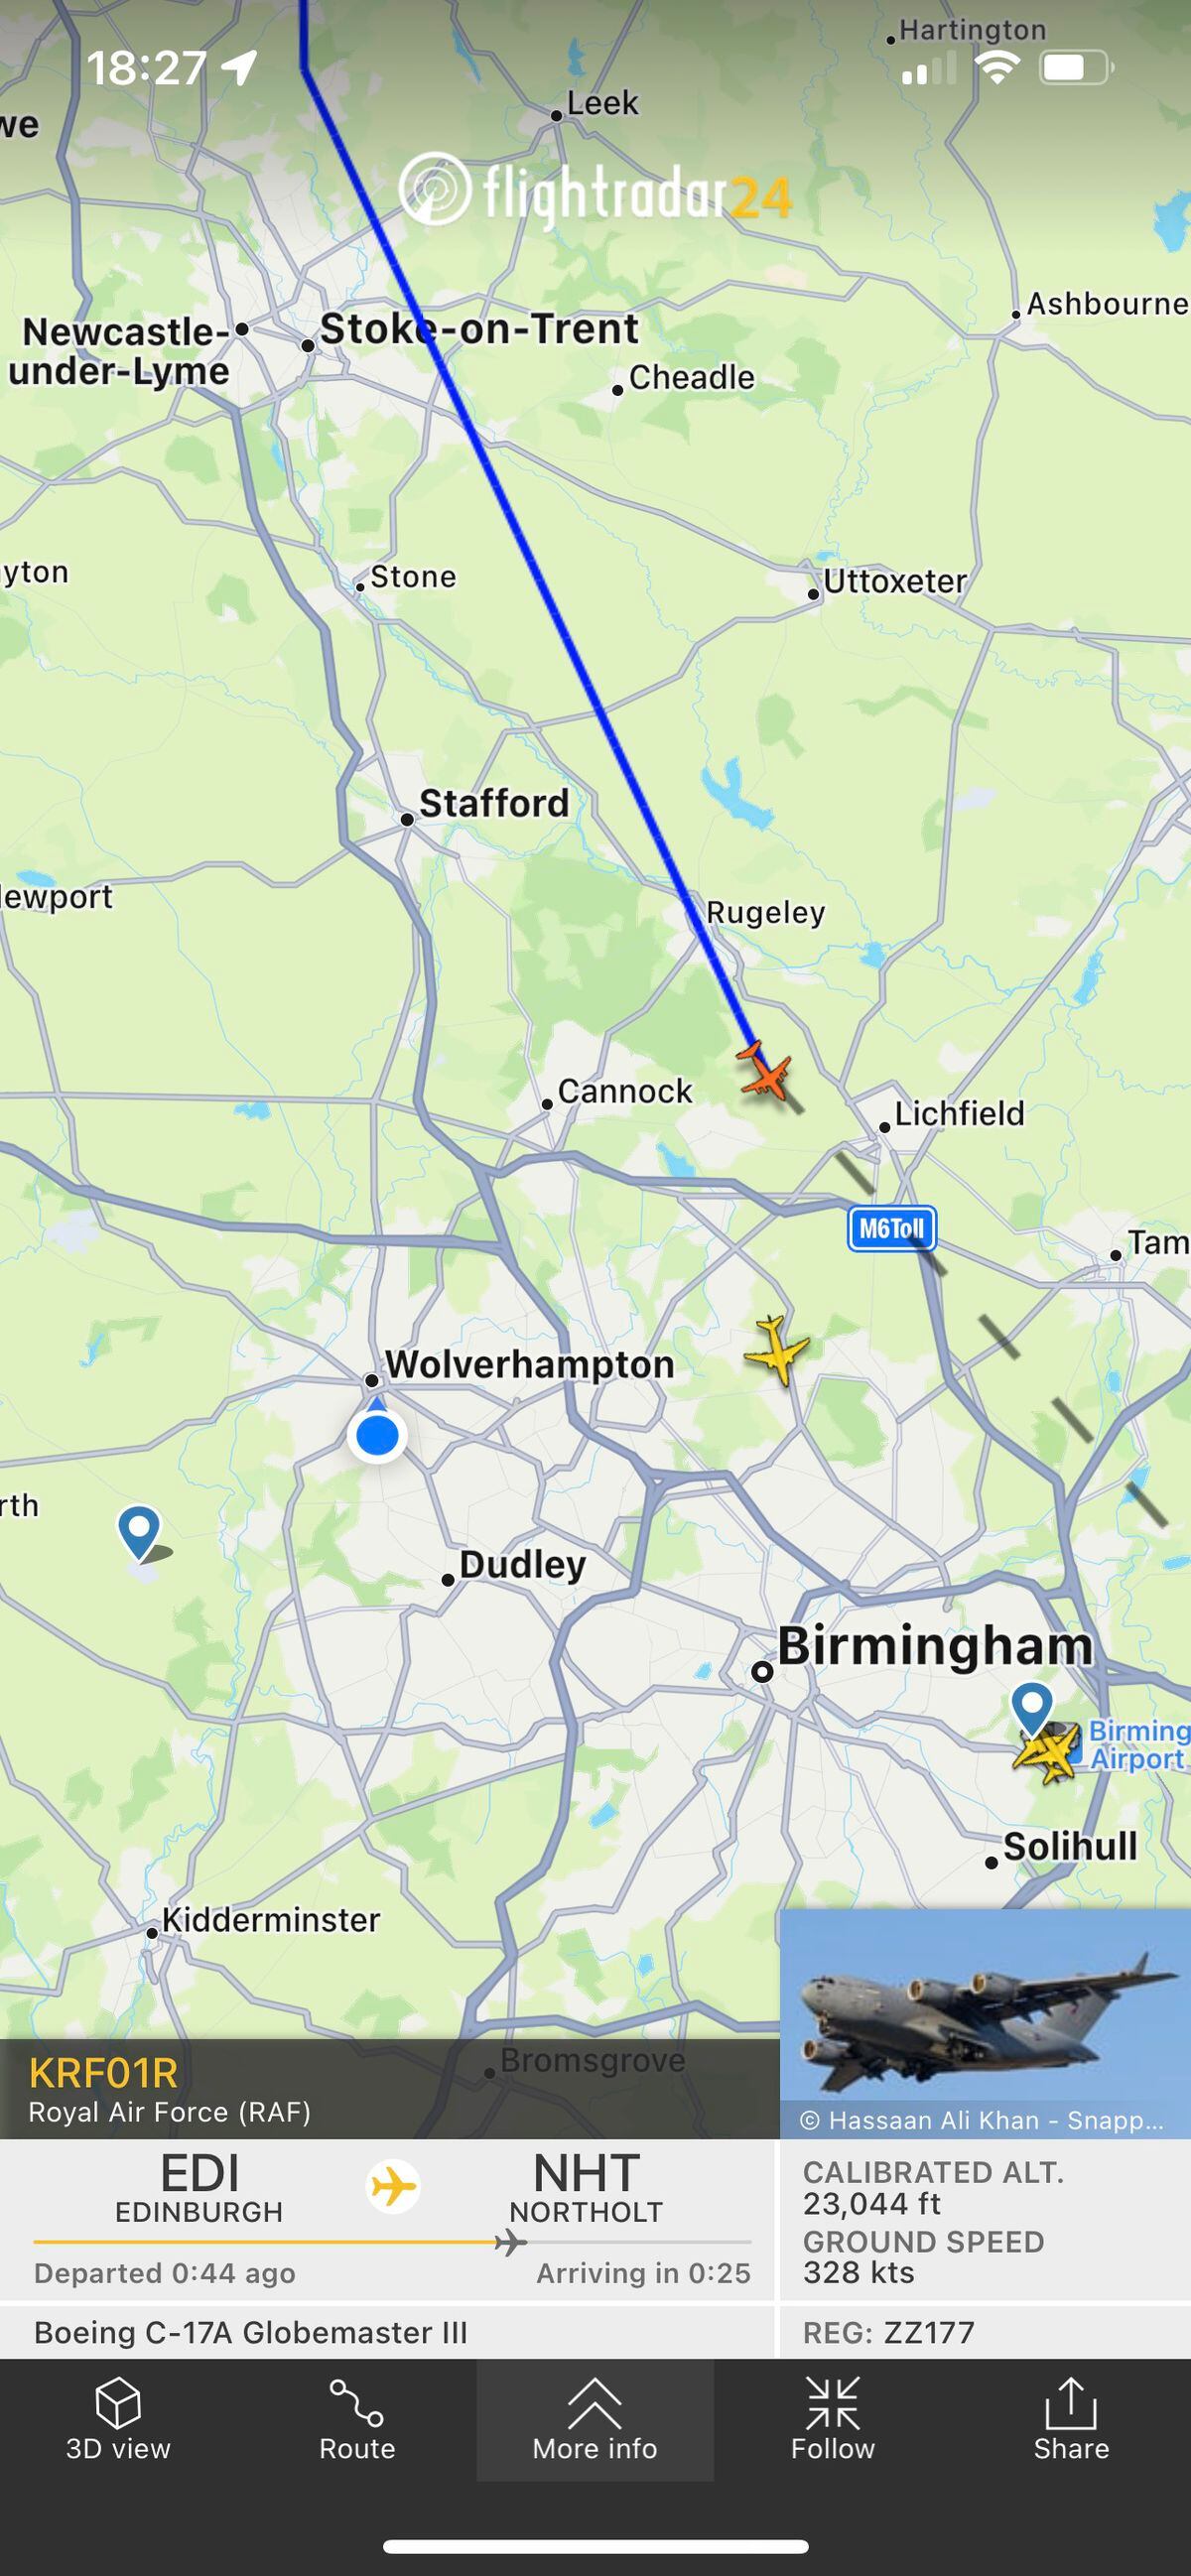 The aircraft flying over the region. Tracked on the Flightradar24 app